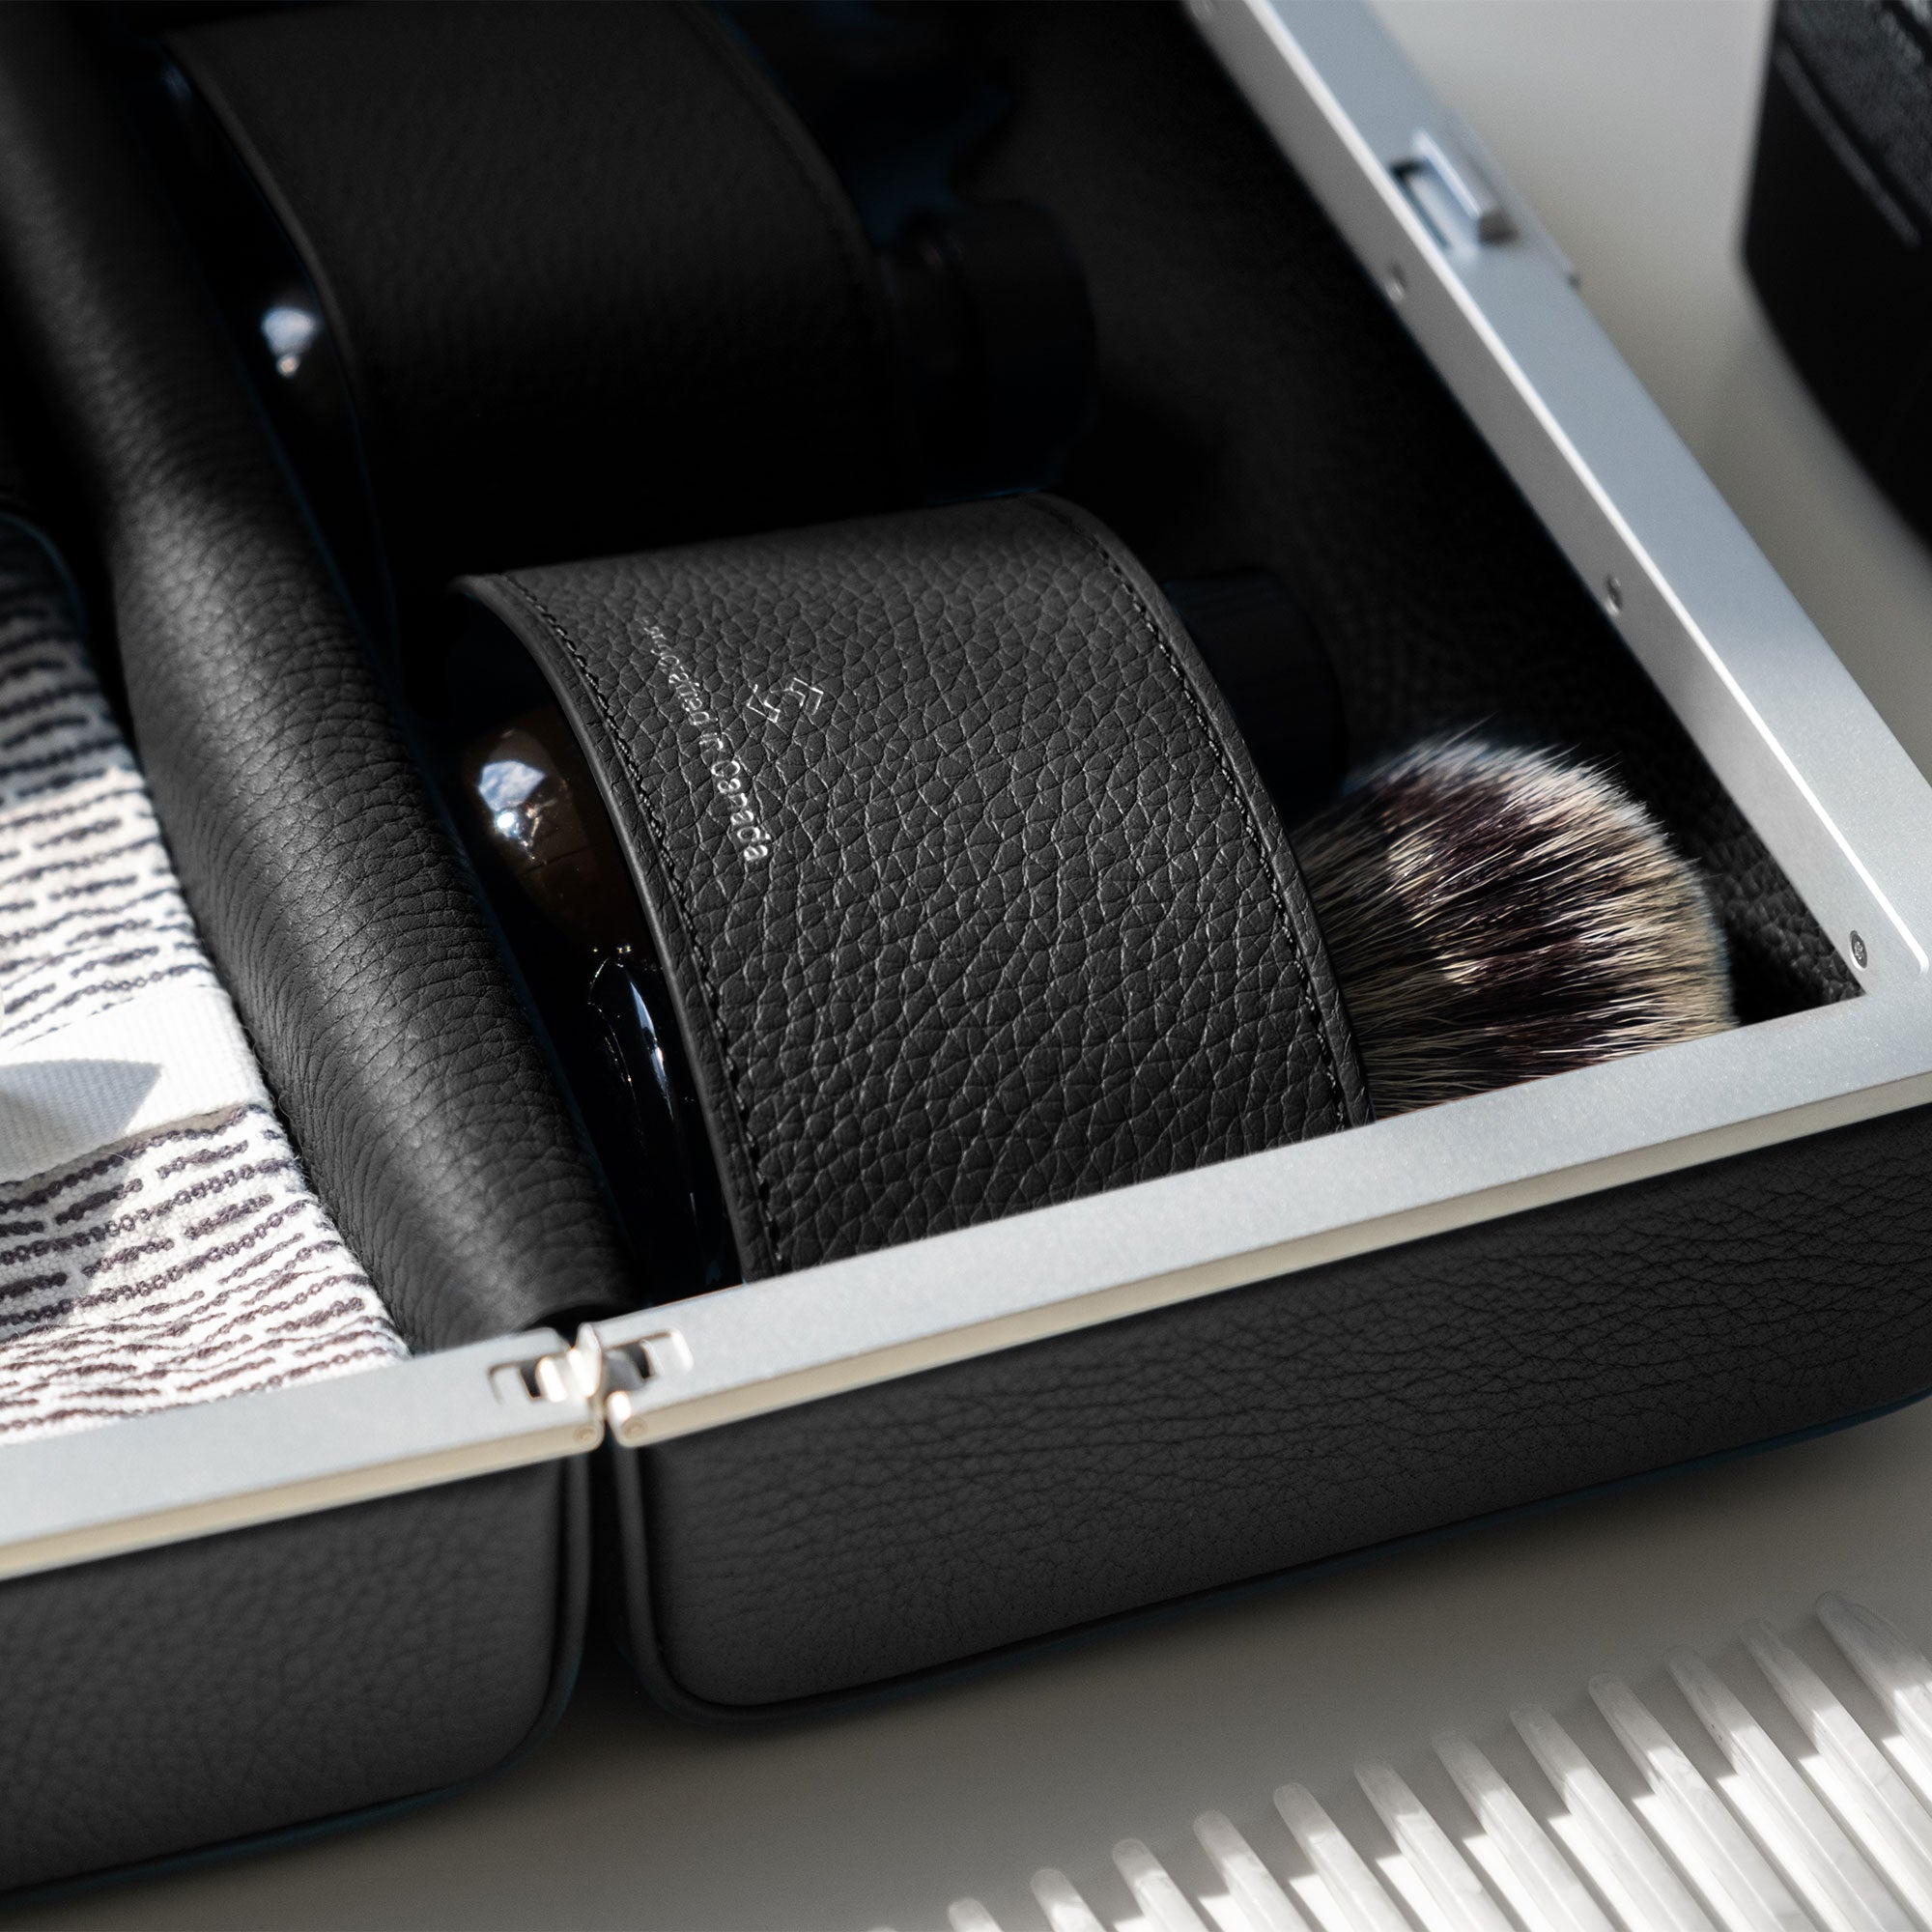 Detail photo of the black leather Moraine holding a makeup brush